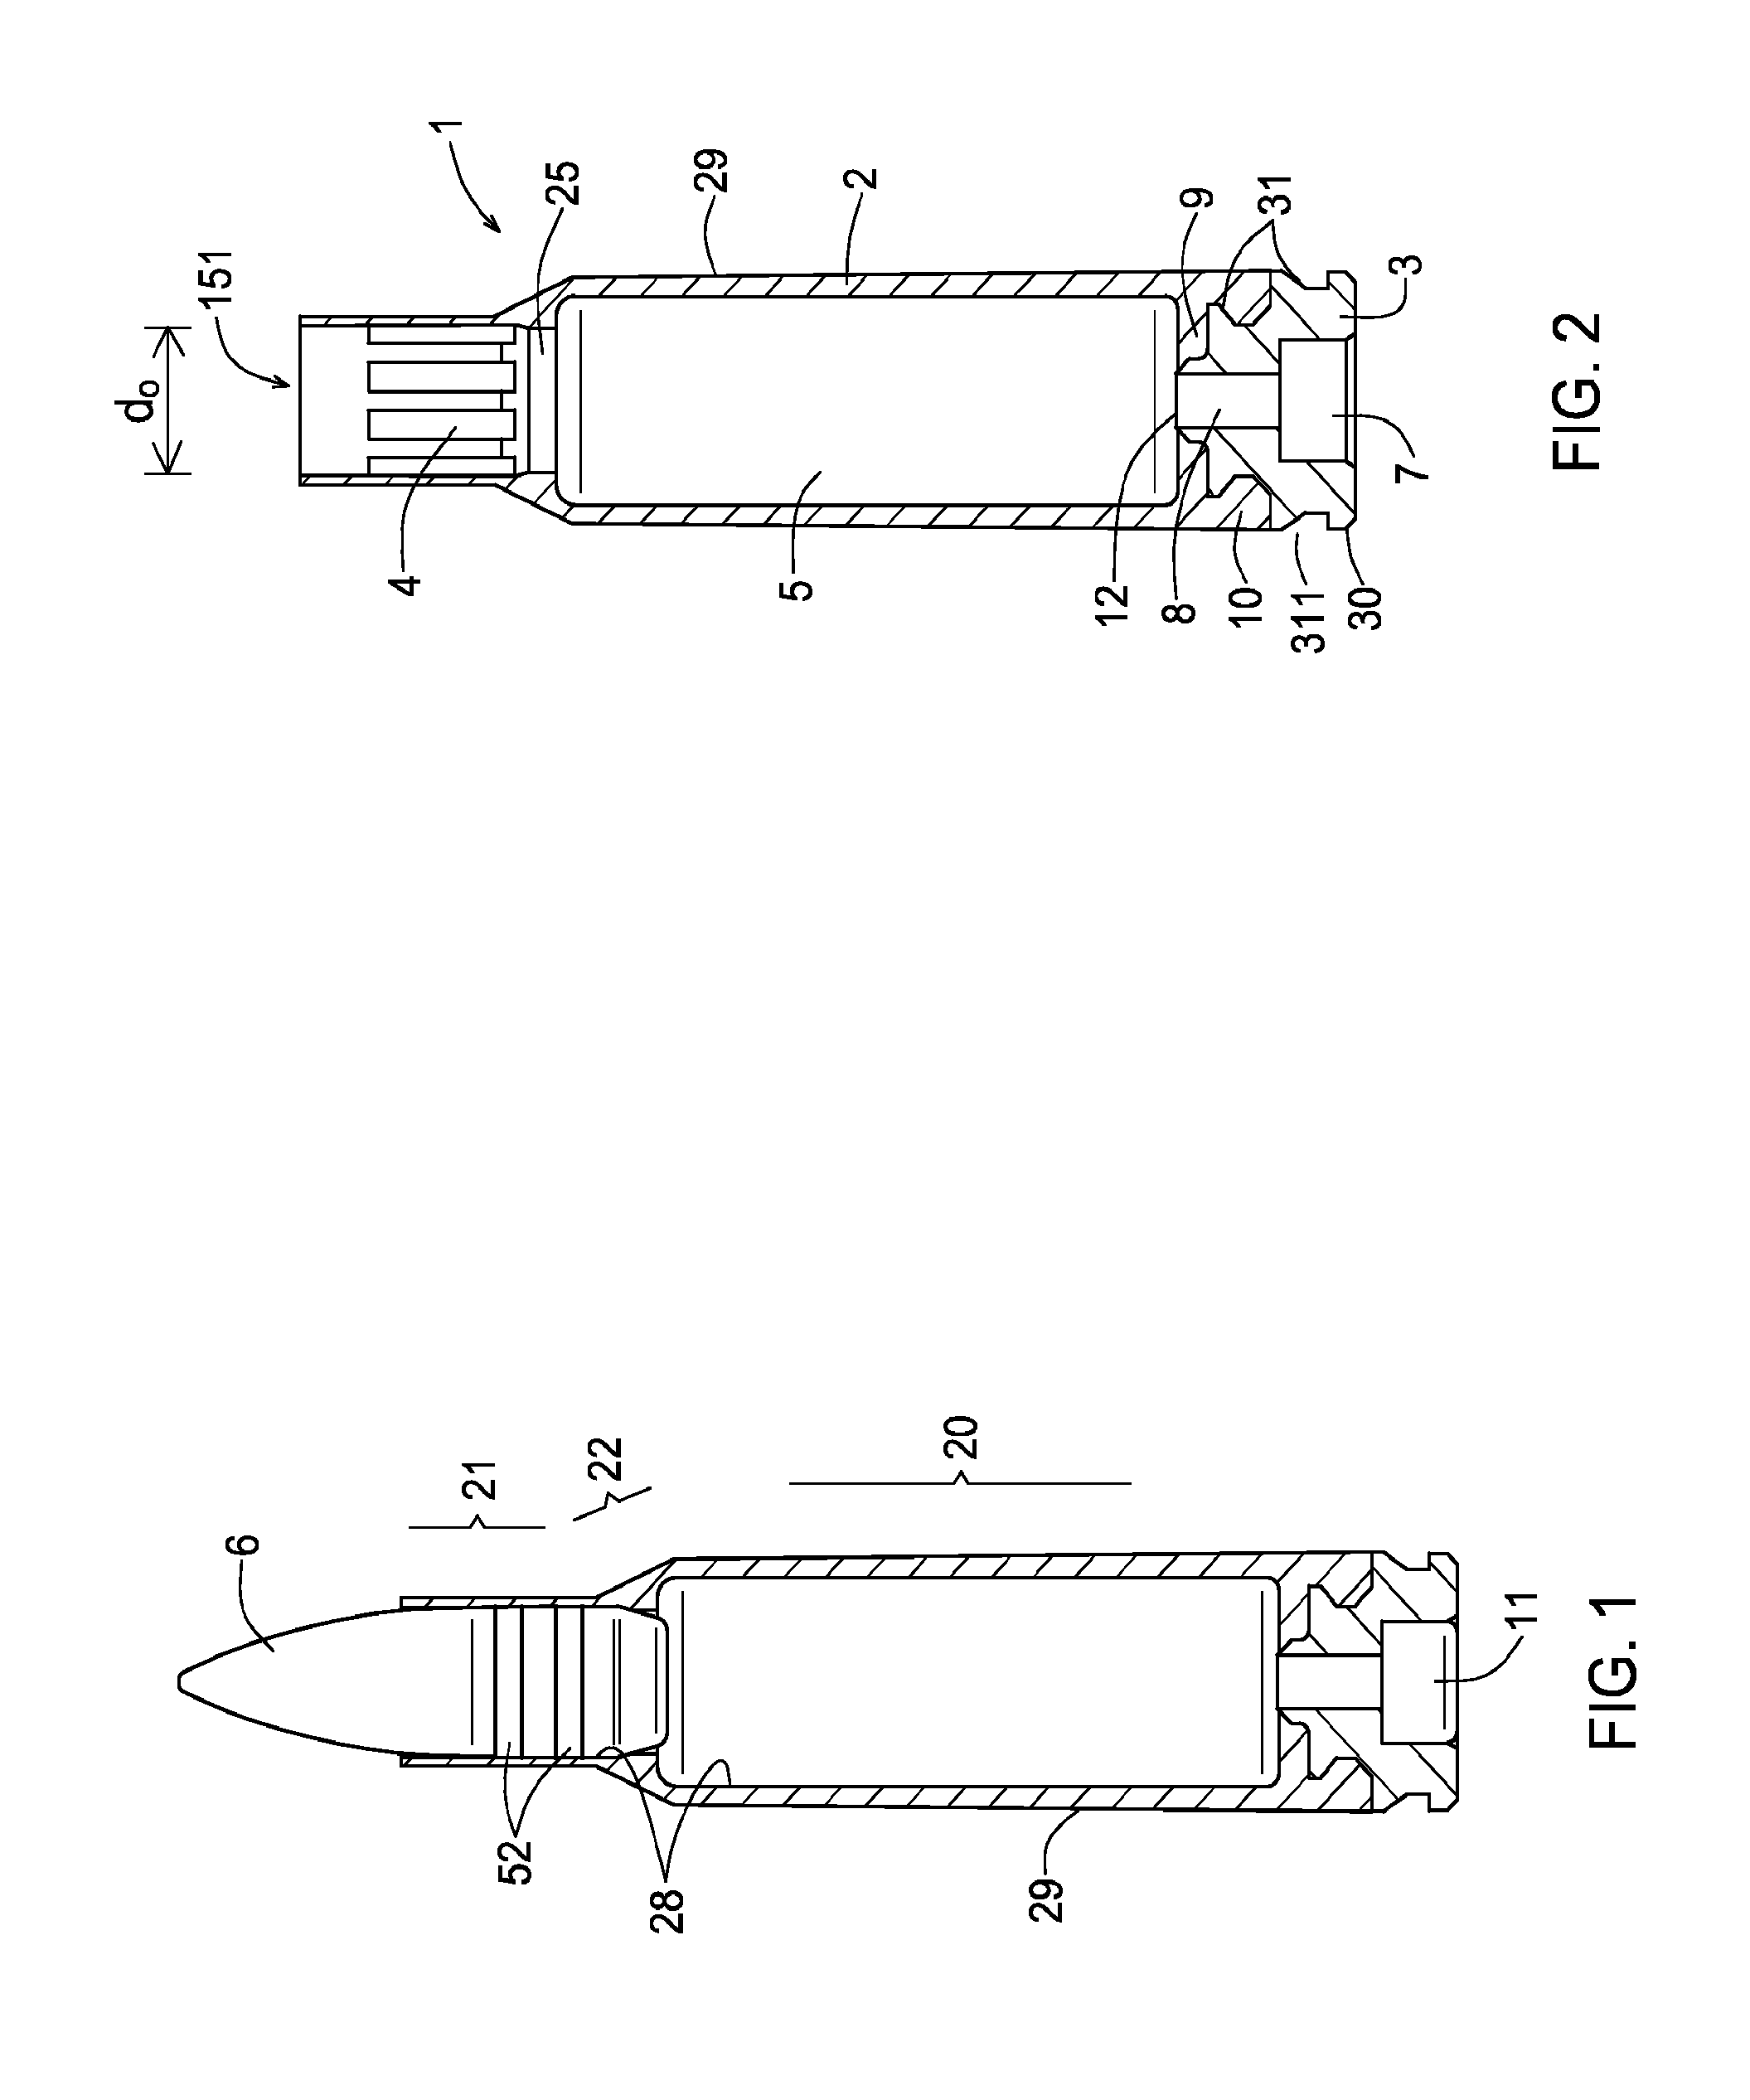 Methods and apparatus for making molded objects, and molded objects made therefrom